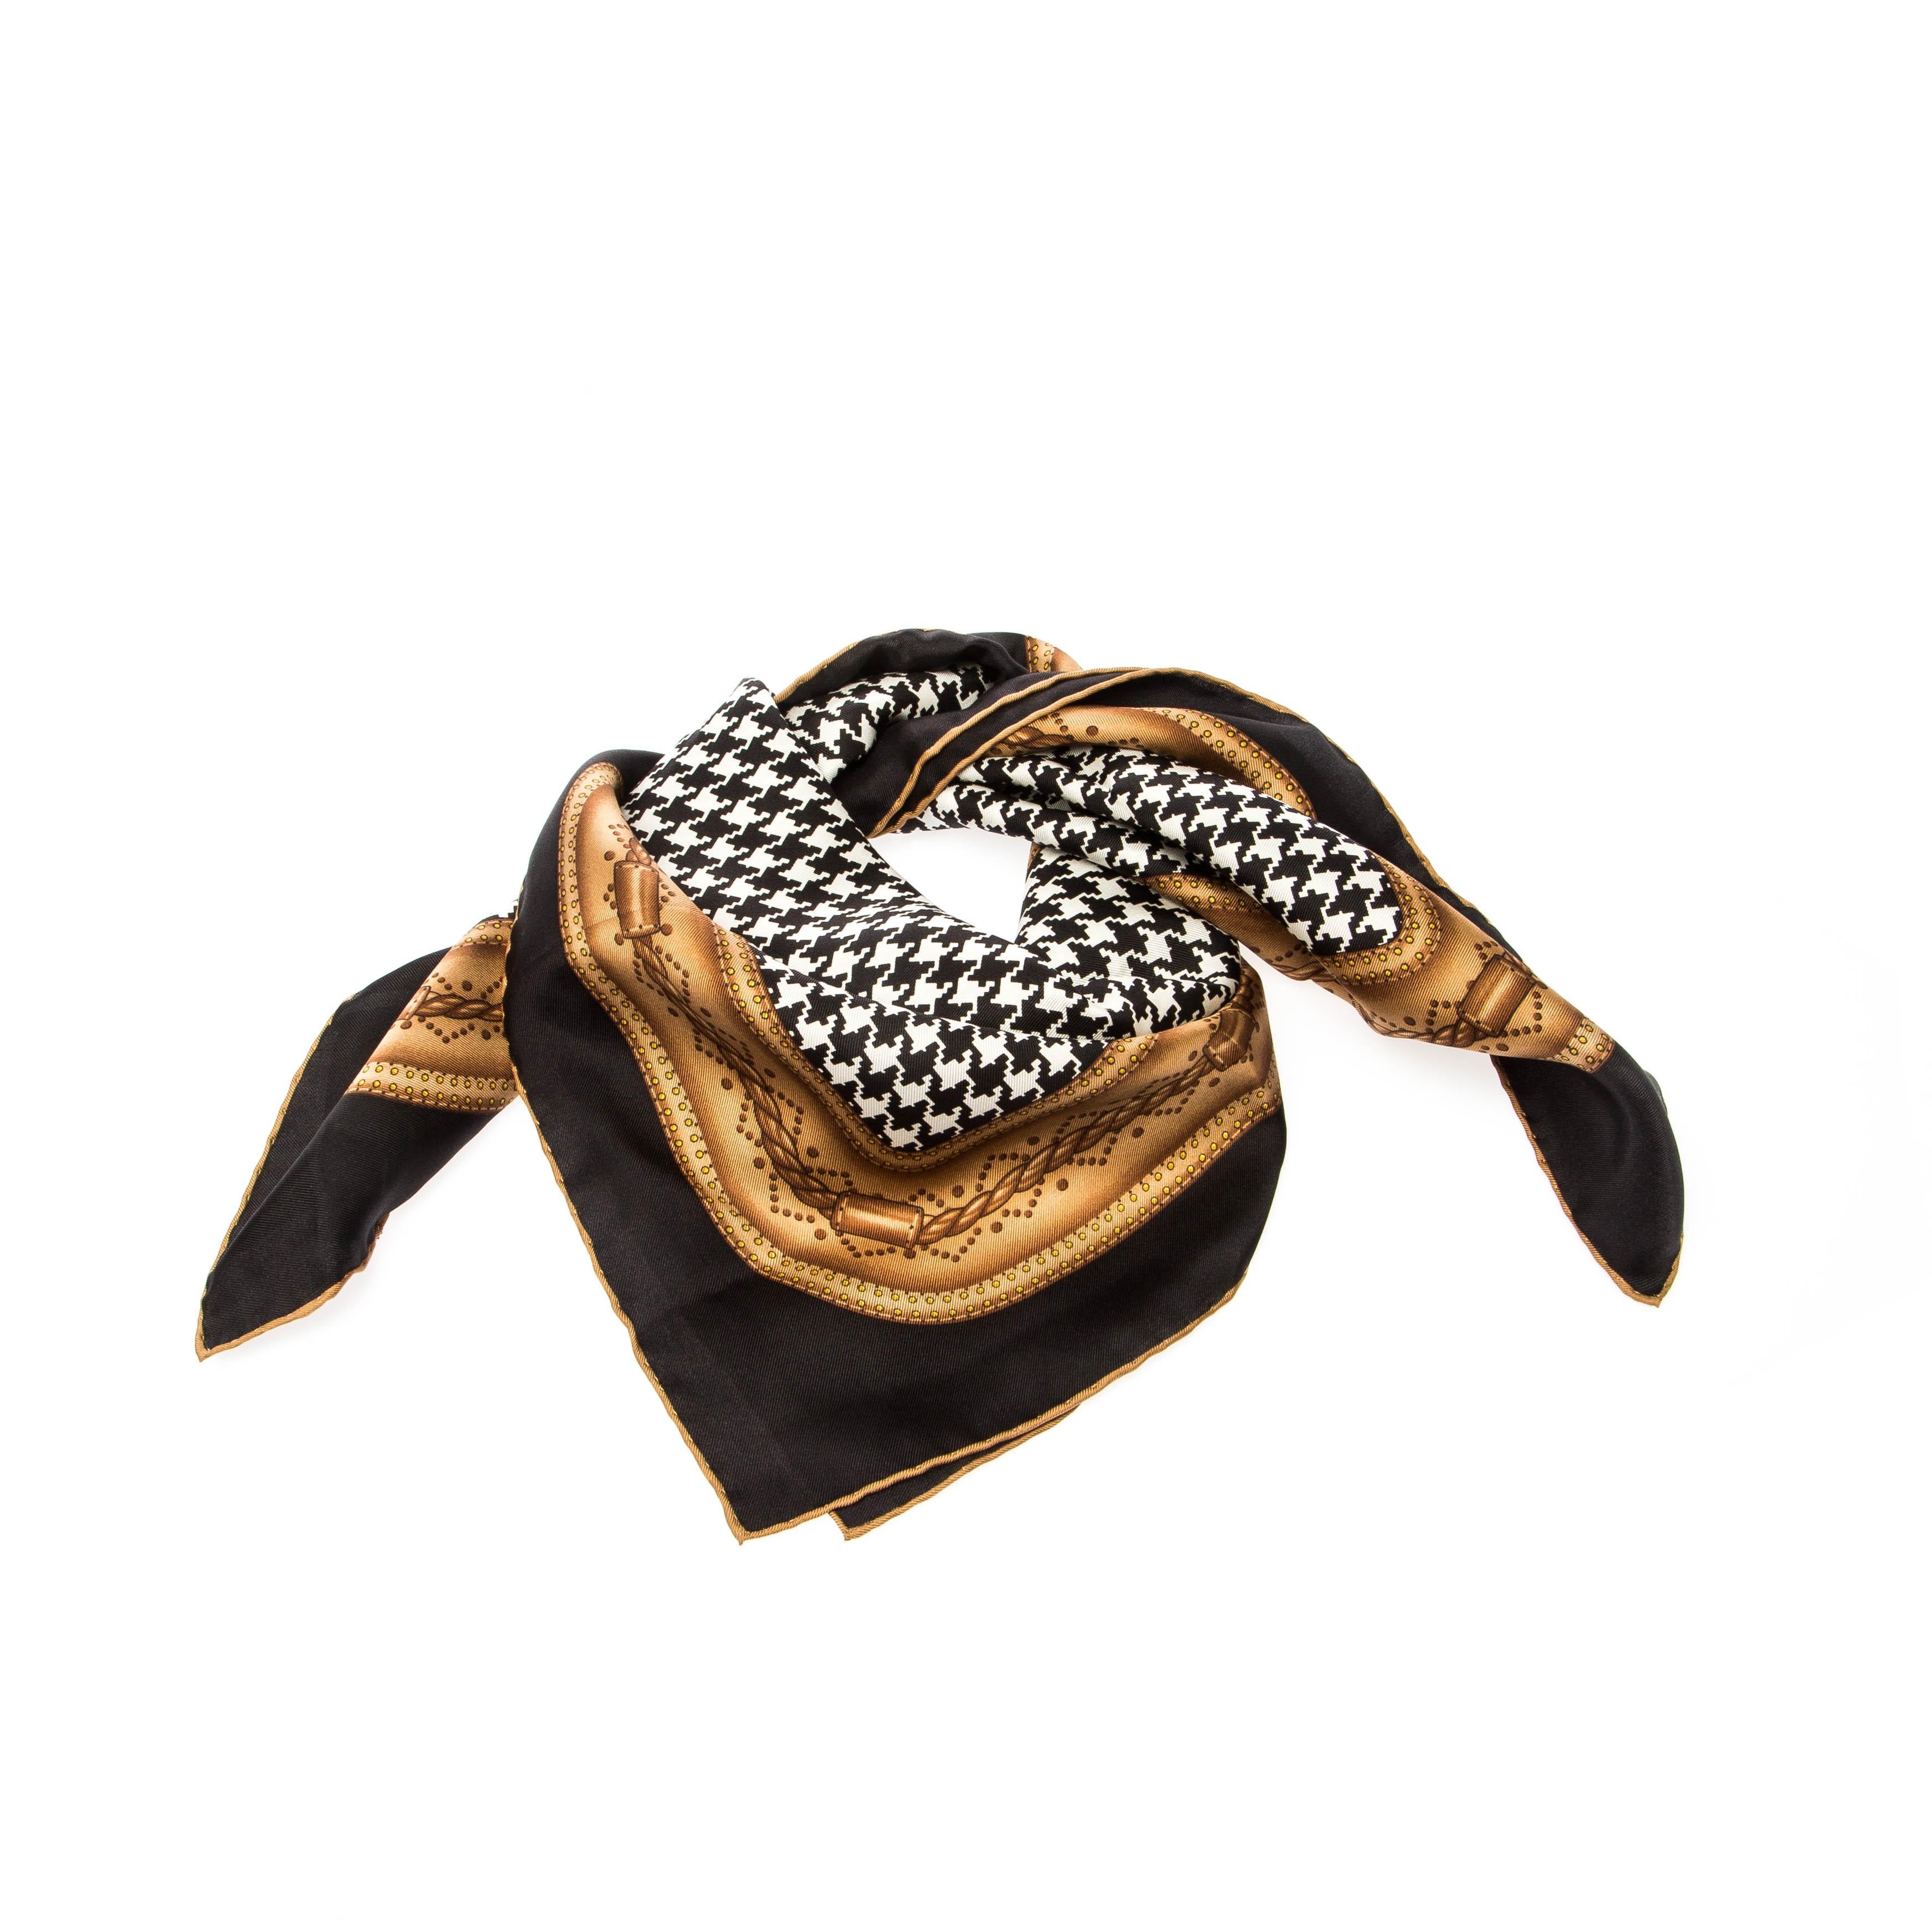 Add an elegant element to your chic style with this silk scarf from Gucci! The piece has been cut from silk and designed with a houndstooth print in a monochrome style and hemmed edges.

Includes: The Luxury Closet Packaging

